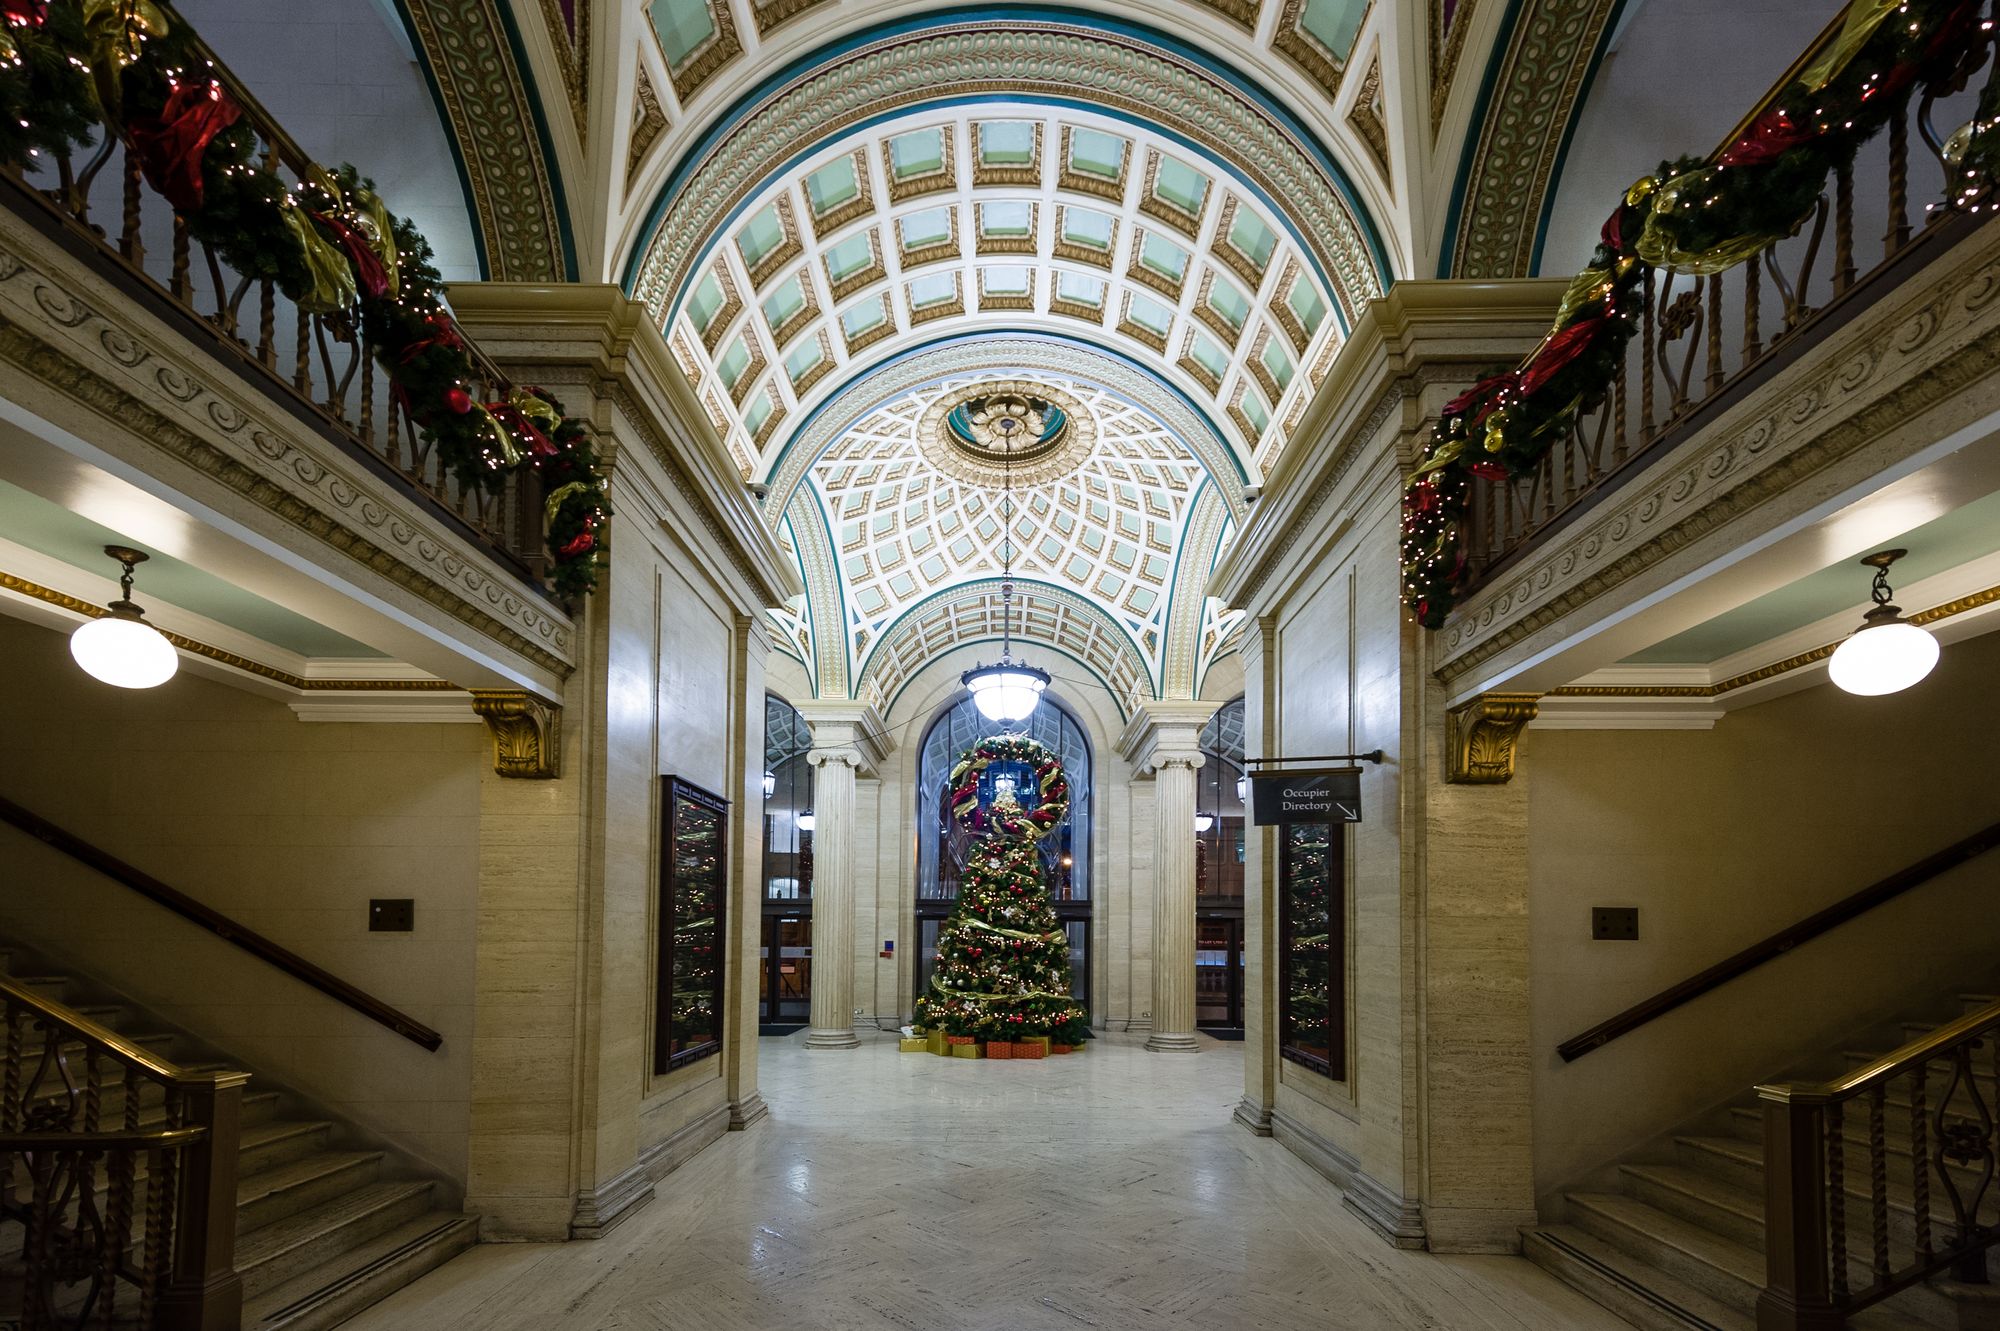 Wide angle photograph of ornate architectural entrance way covered in decorations. There is a Christmas Tree in the middle.